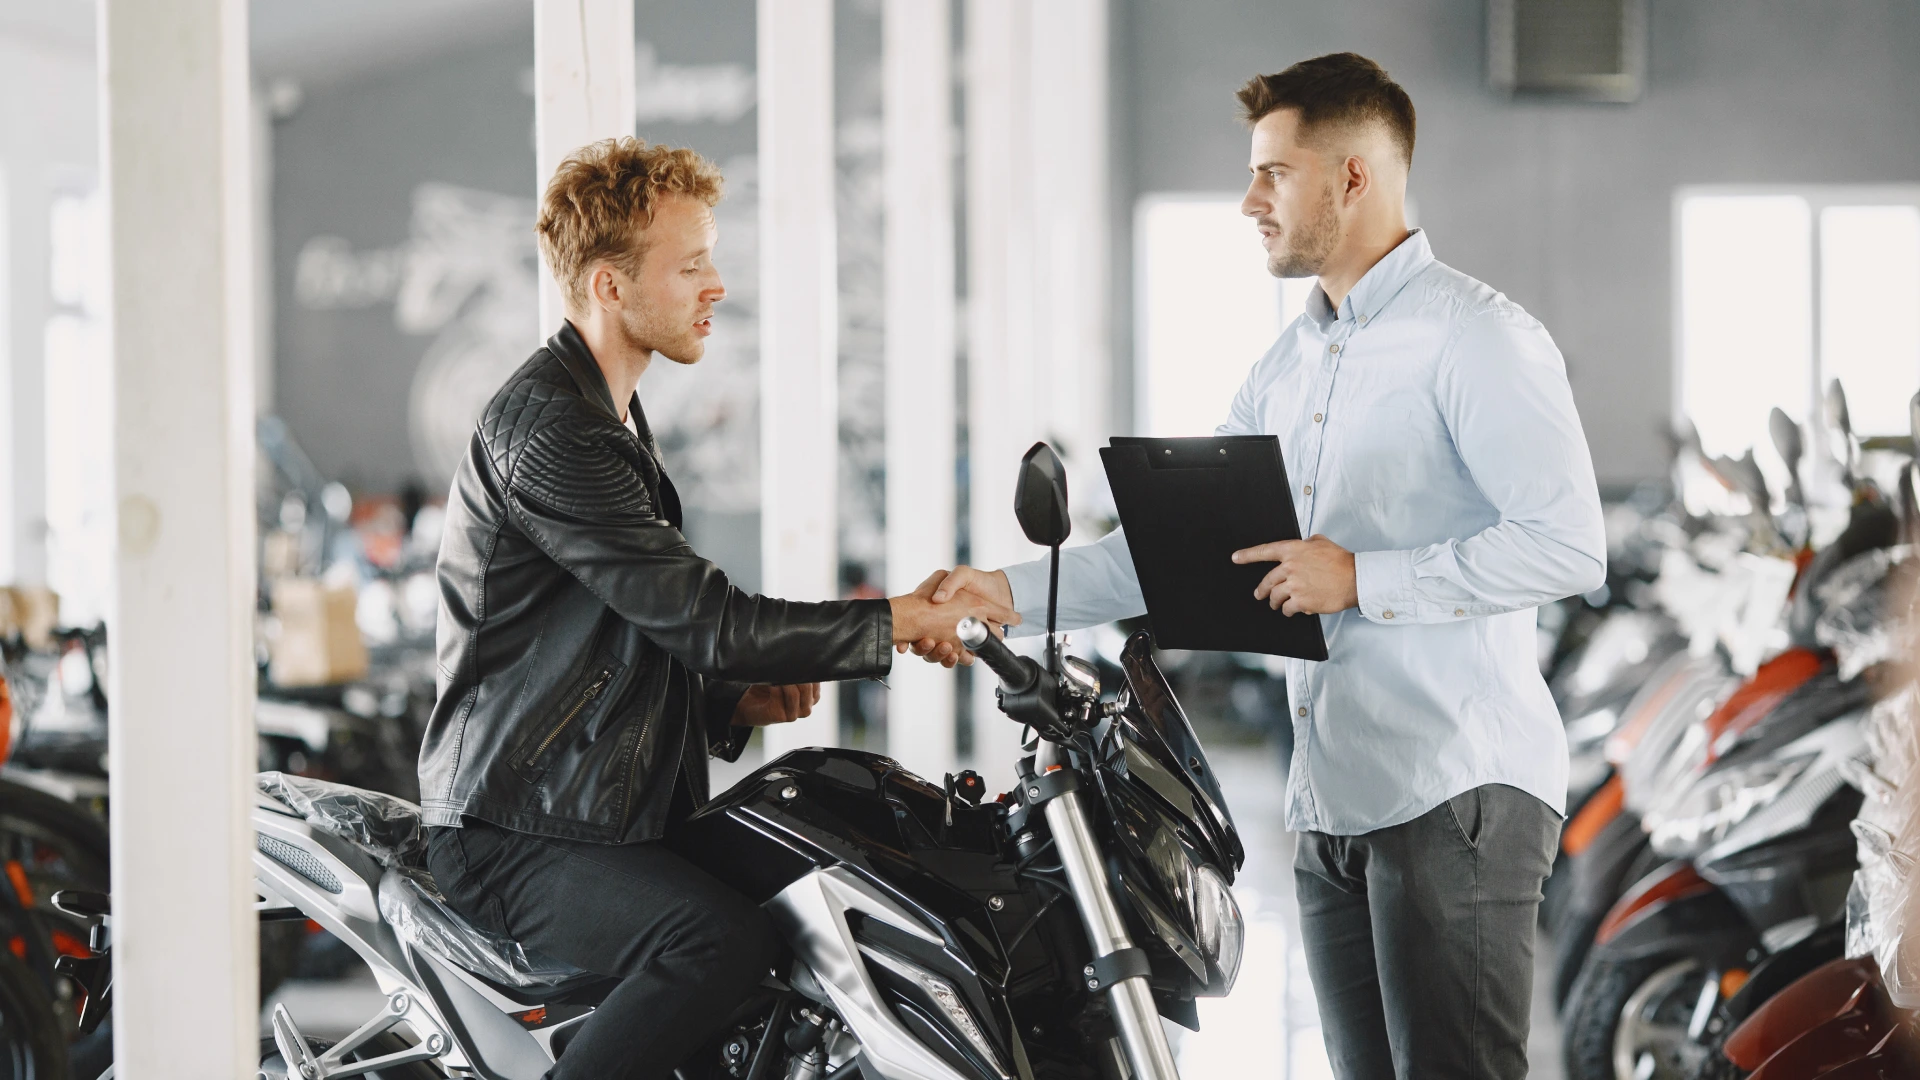 The purchase of a pre-owned motorcycle offers several advantages over the purchase of a new motorcycle.